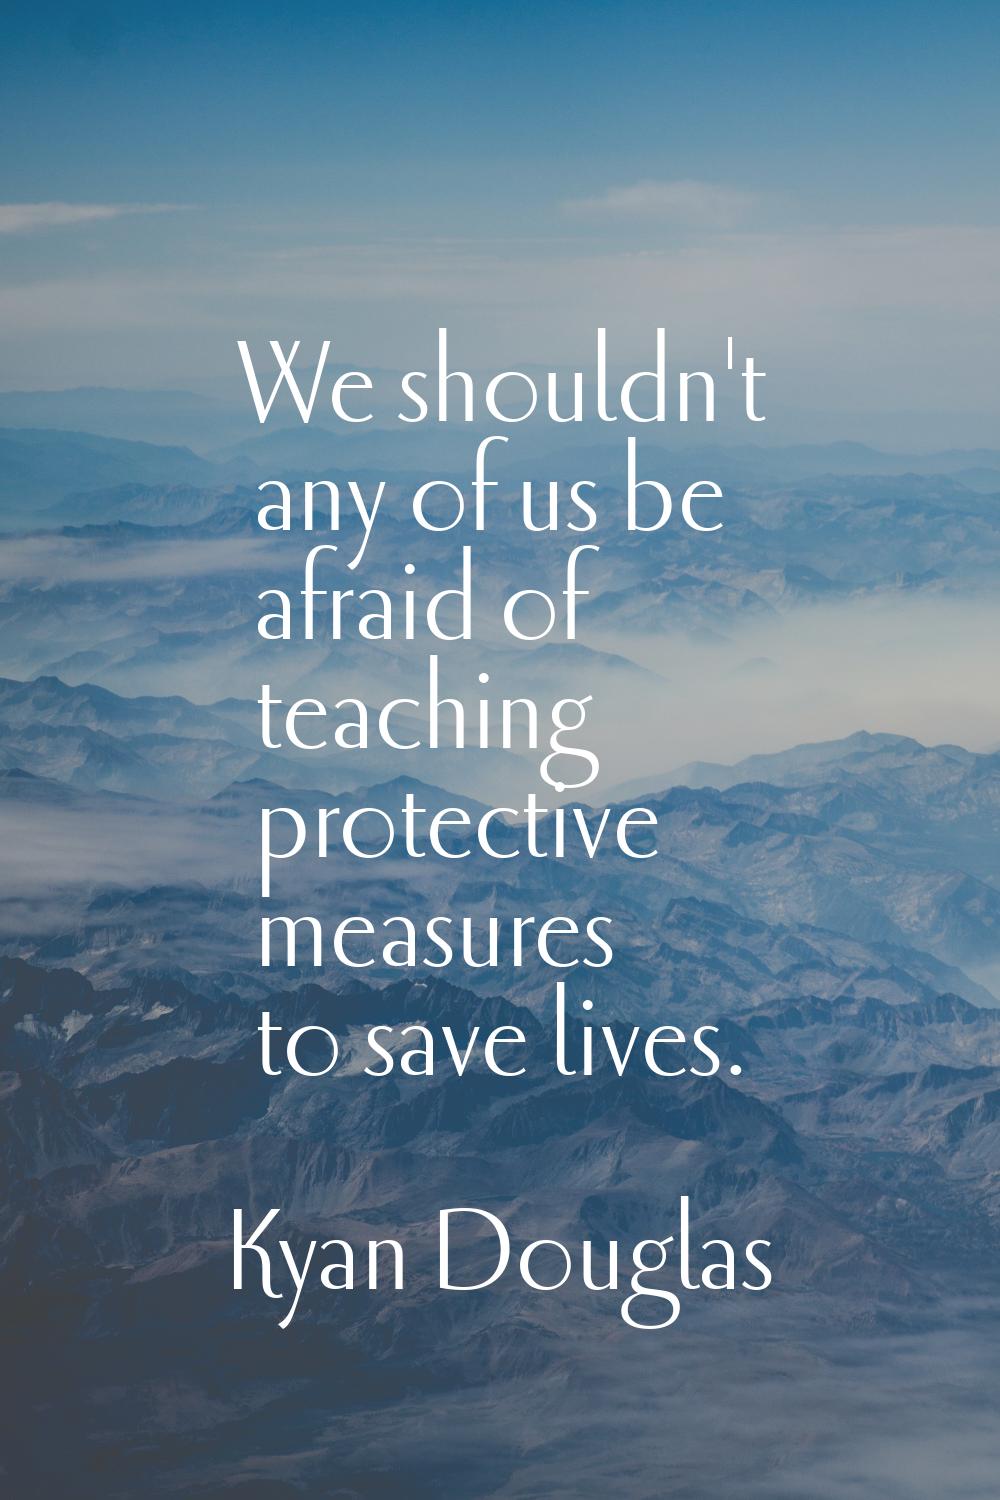 We shouldn't any of us be afraid of teaching protective measures to save lives.